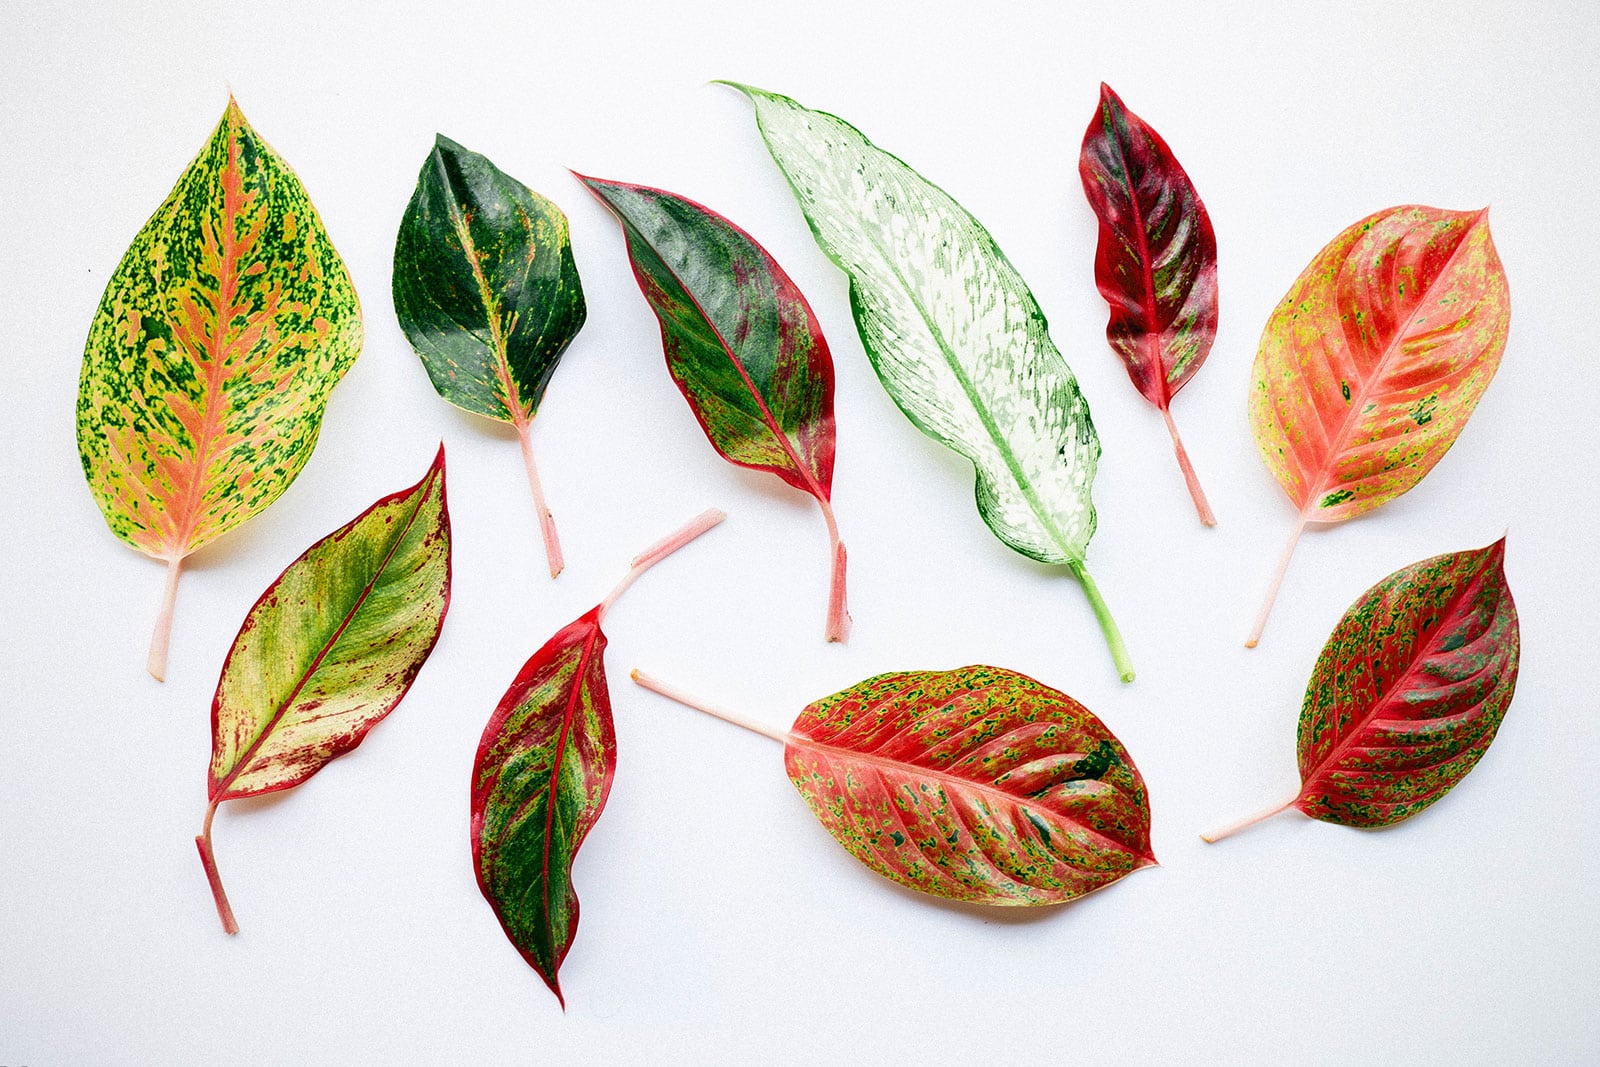 10 different Aglaonema leaves in varying colors and patterns on a white background